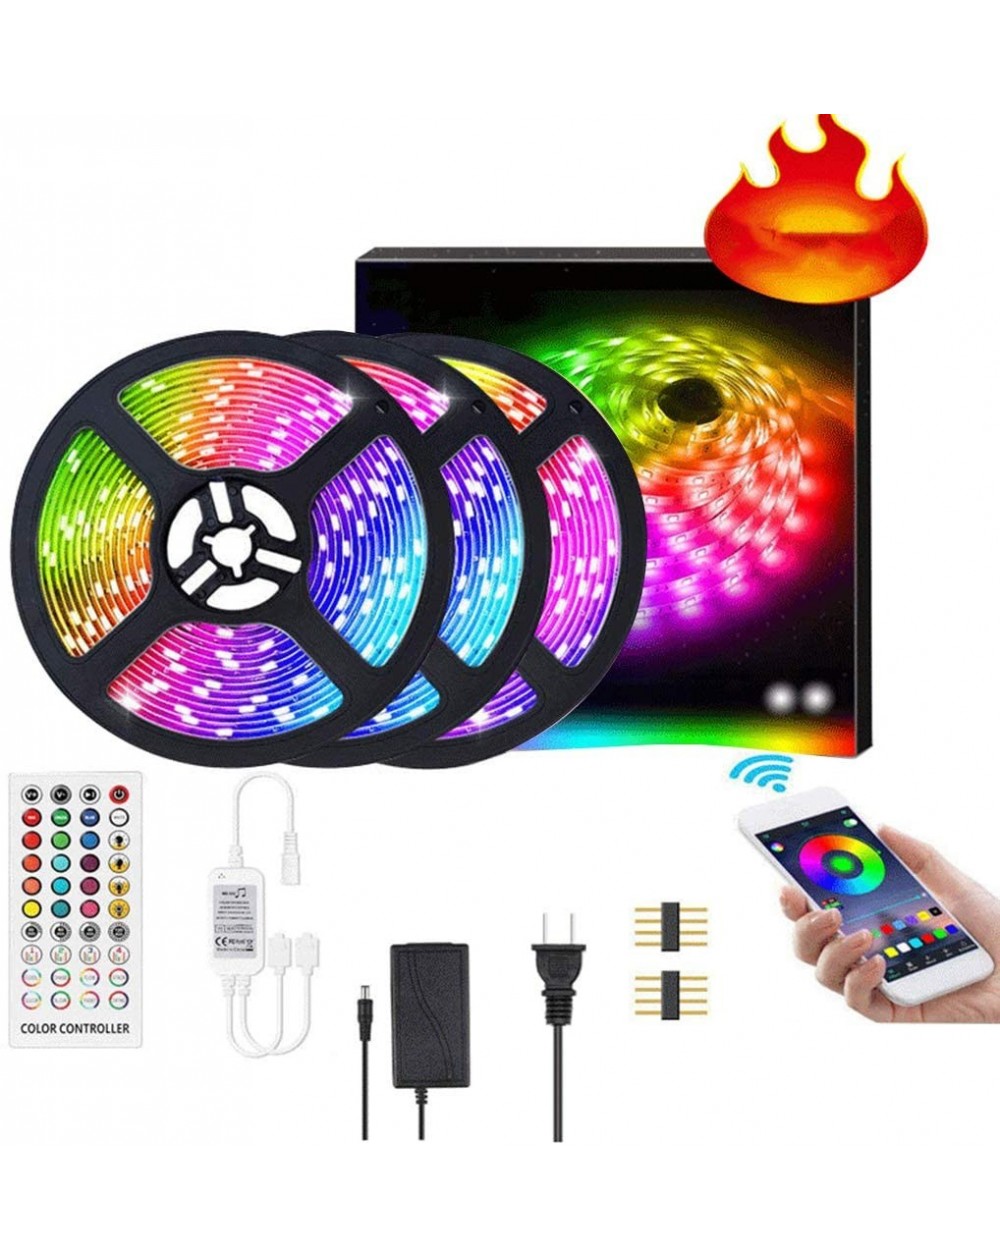 Rope Lights Bluetooth Changing Control Bedroom Decorations - 10 Meter 300 Lights - 40 Key Music Controller + Power Supply - C...